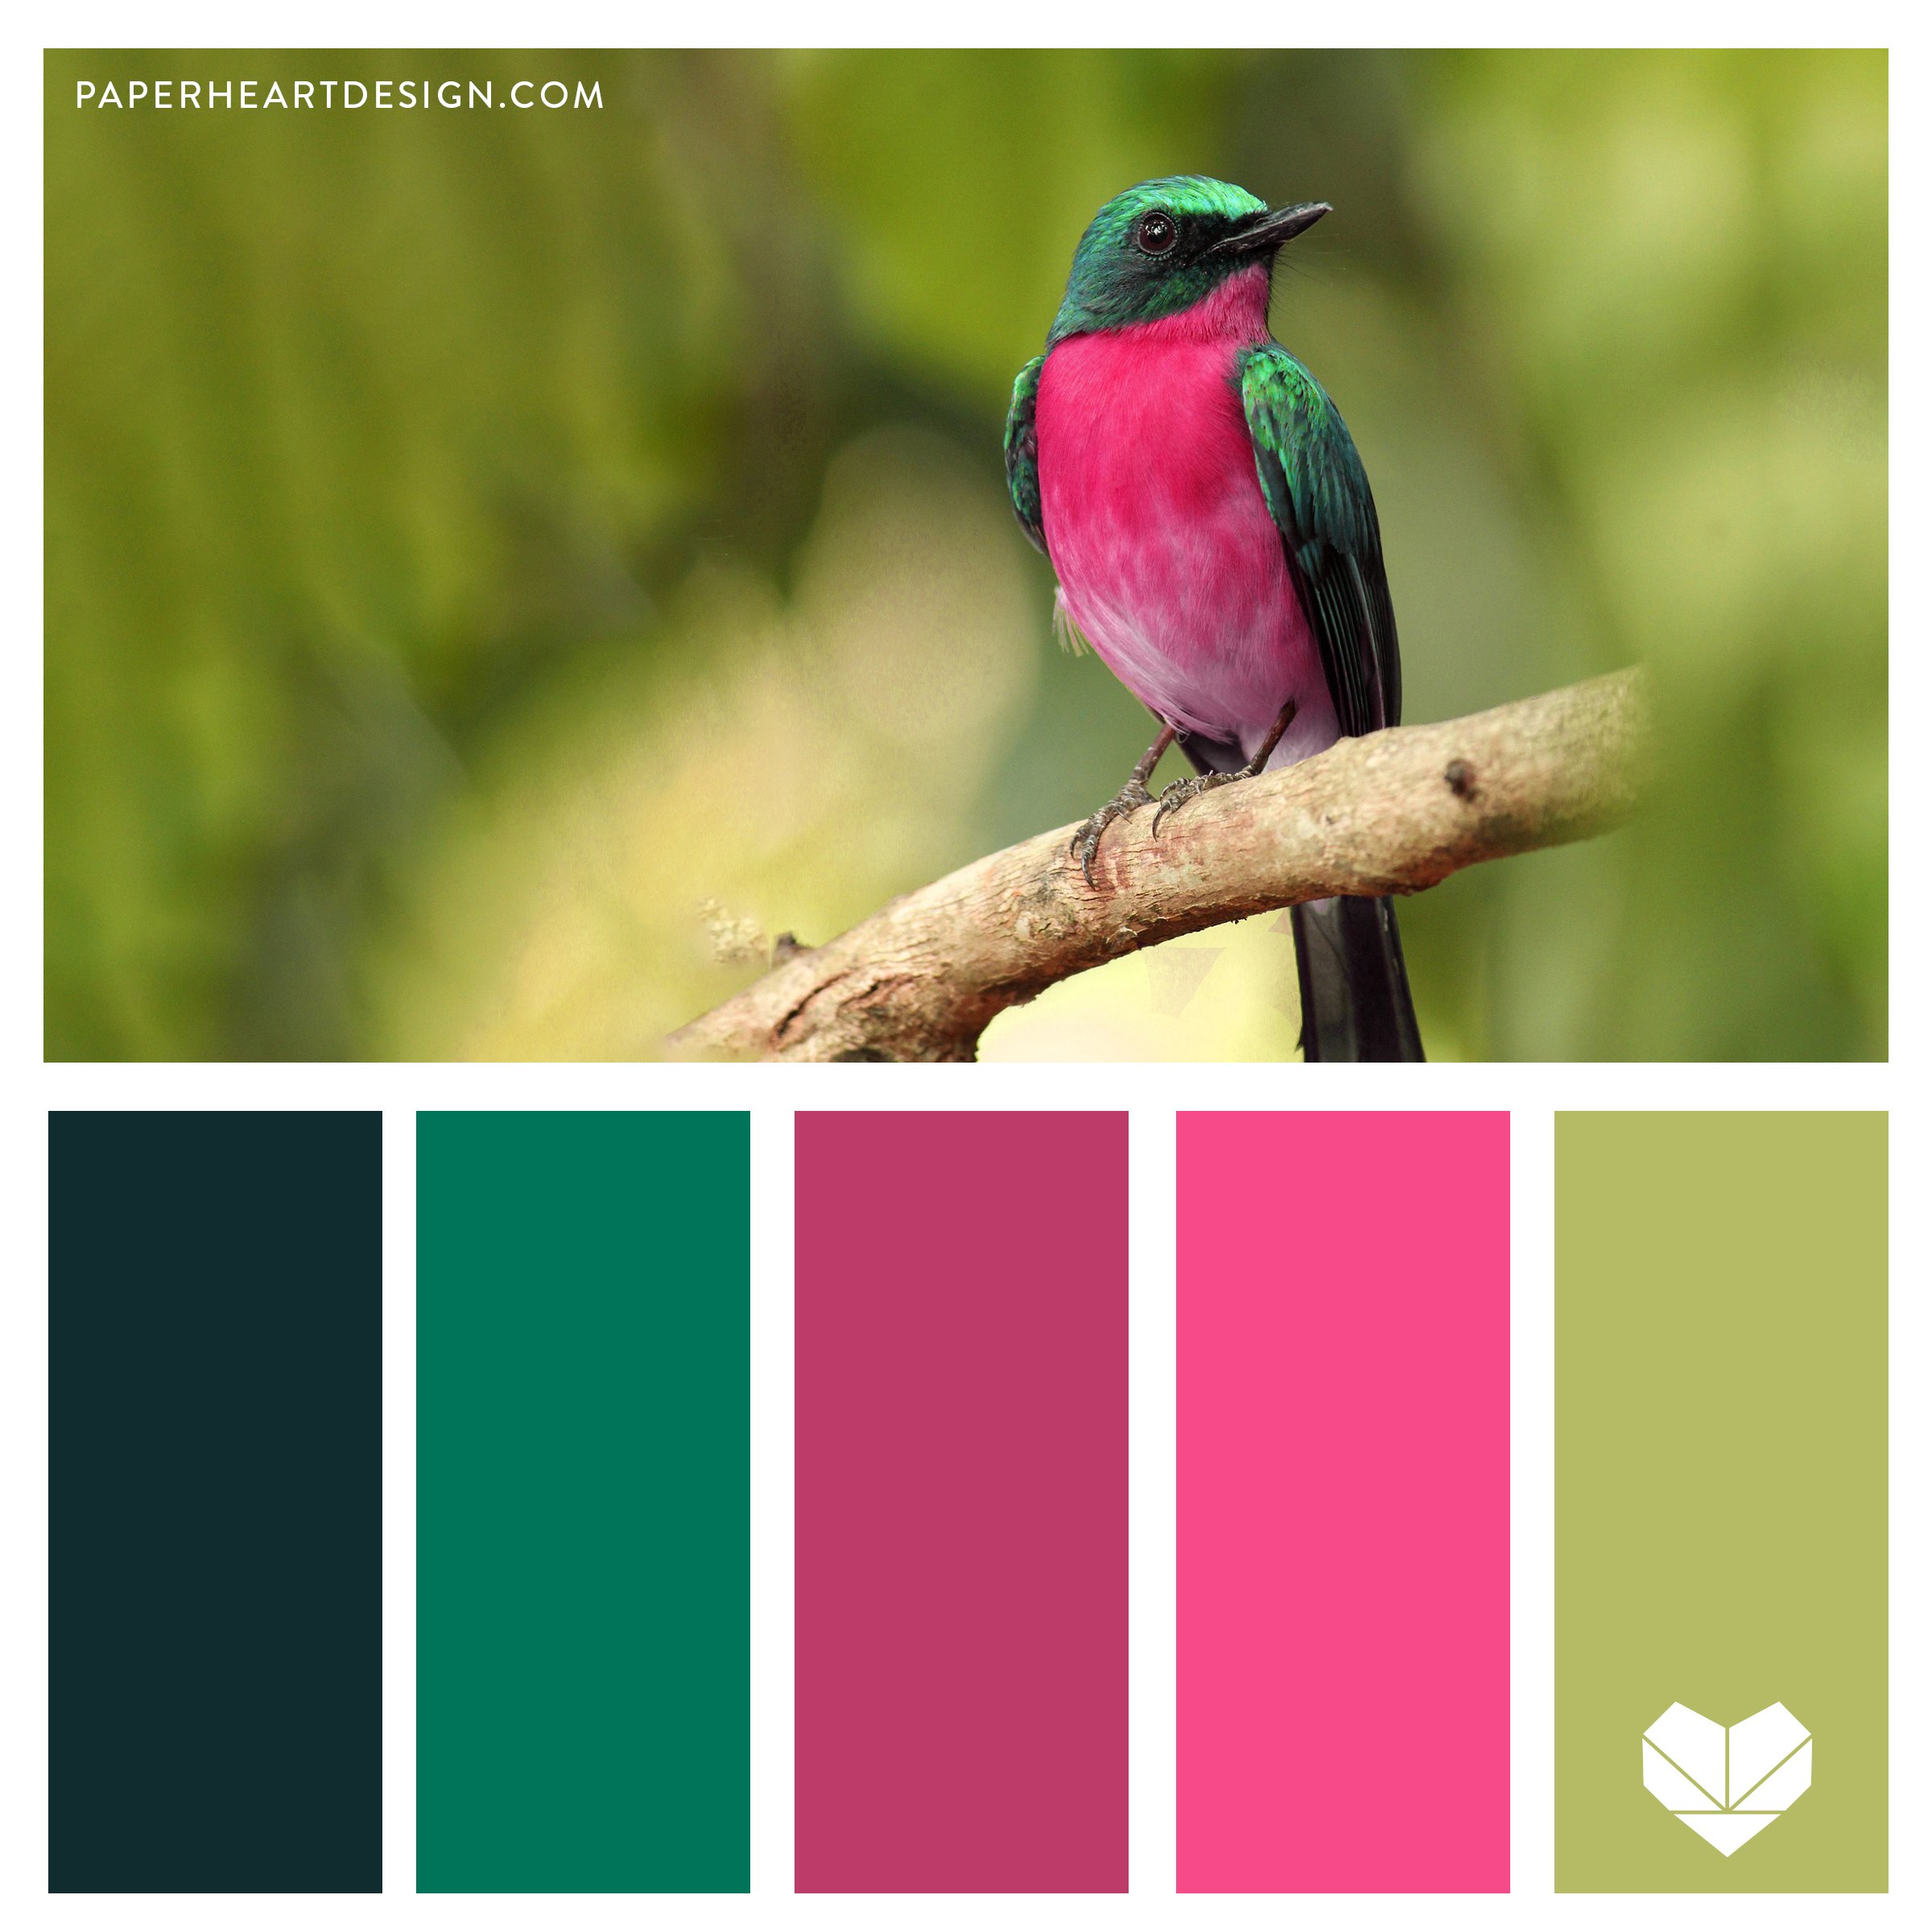 Birds_teal and pink SQ.jpg